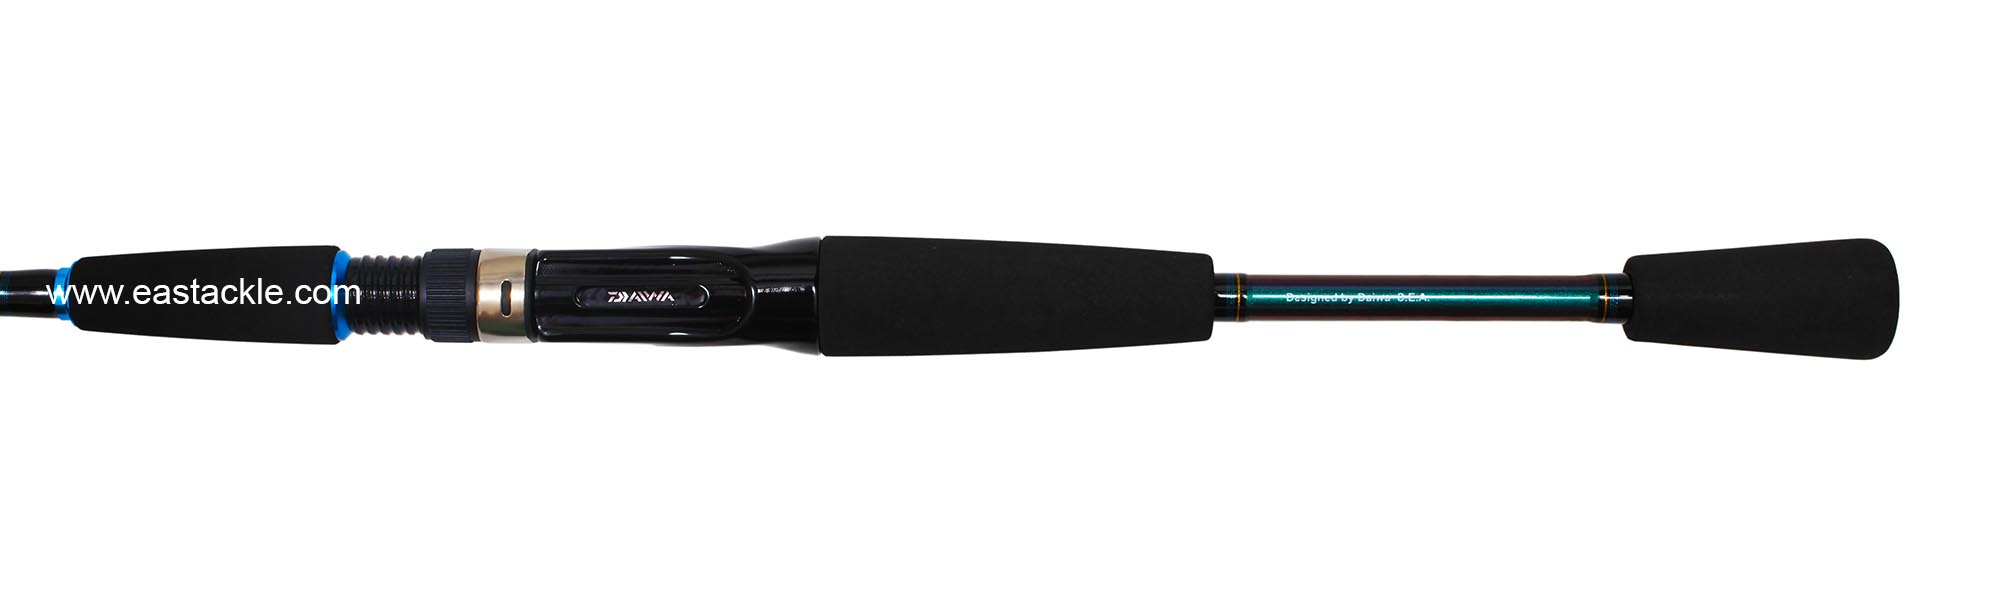 Daiwa - Harrier  - 602MHB-SD - Bait Casting Rod - Handle Section (Top View) | Eastackle